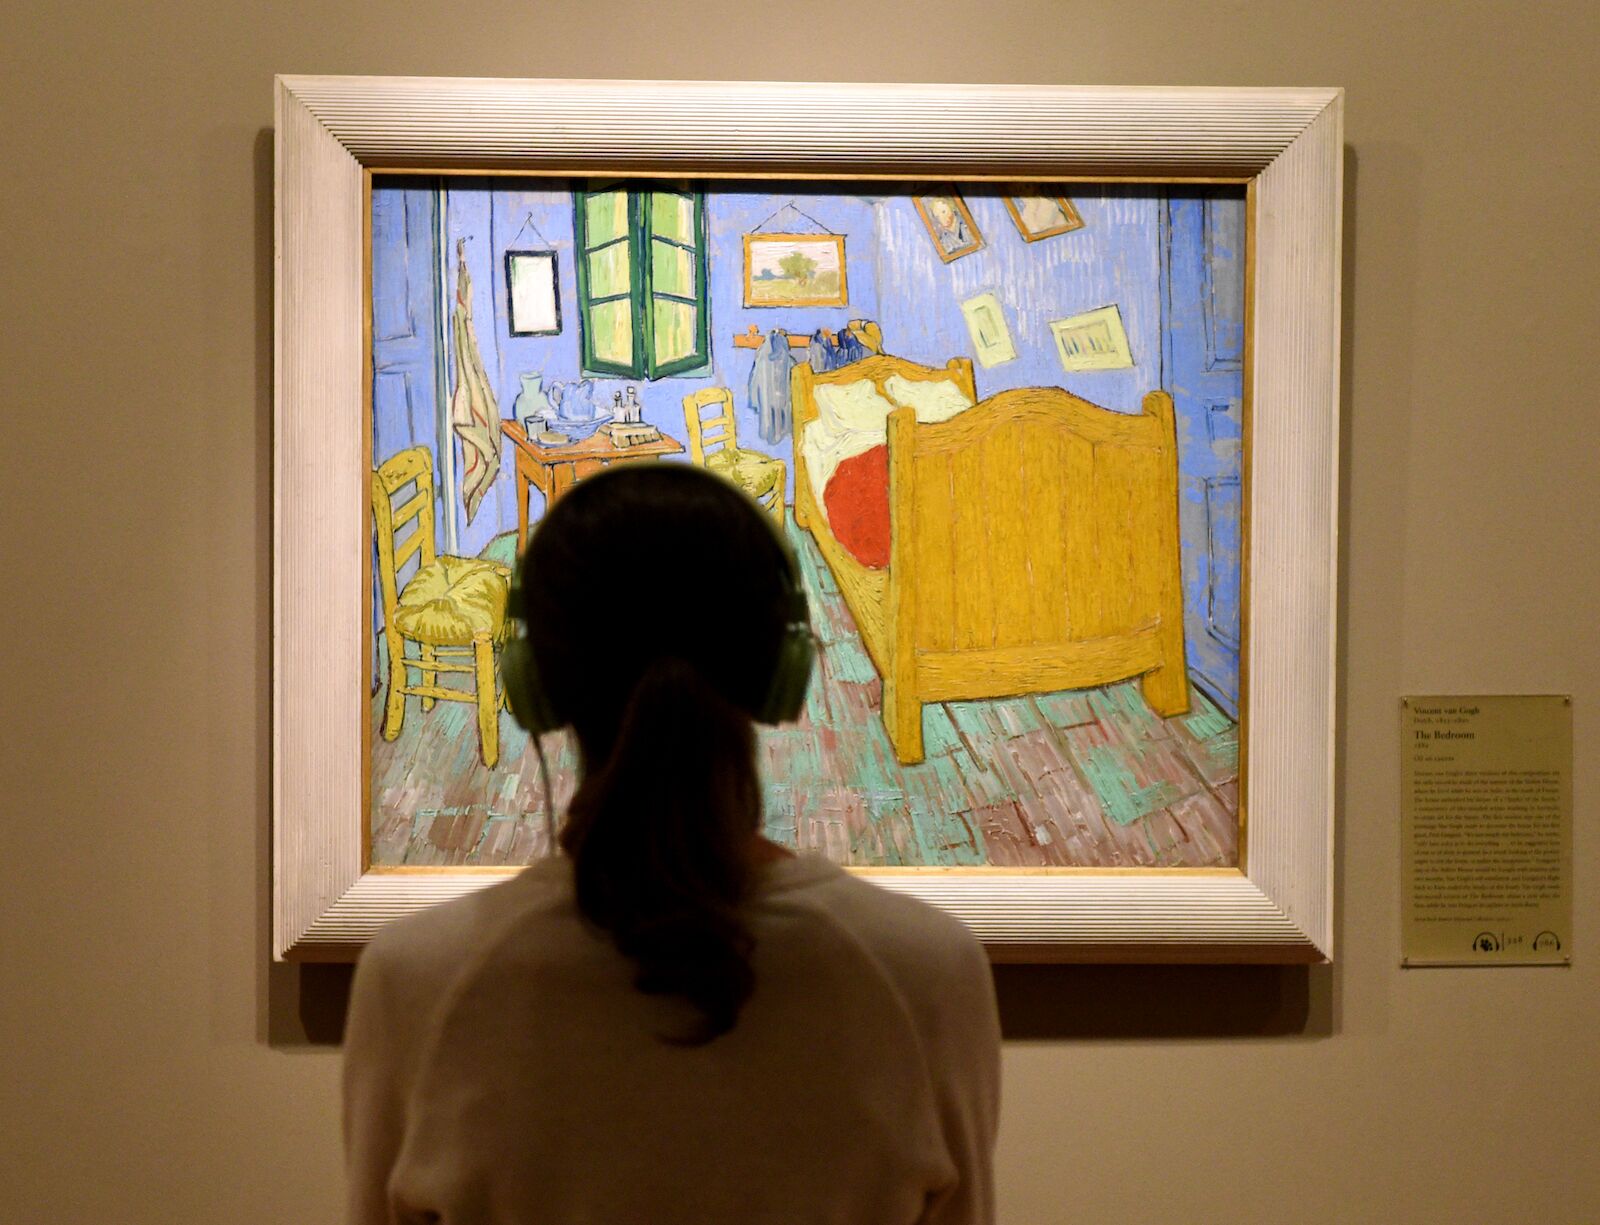 person admiring Van Gogh's "The Bedroom" at the Art Institute of Chicago